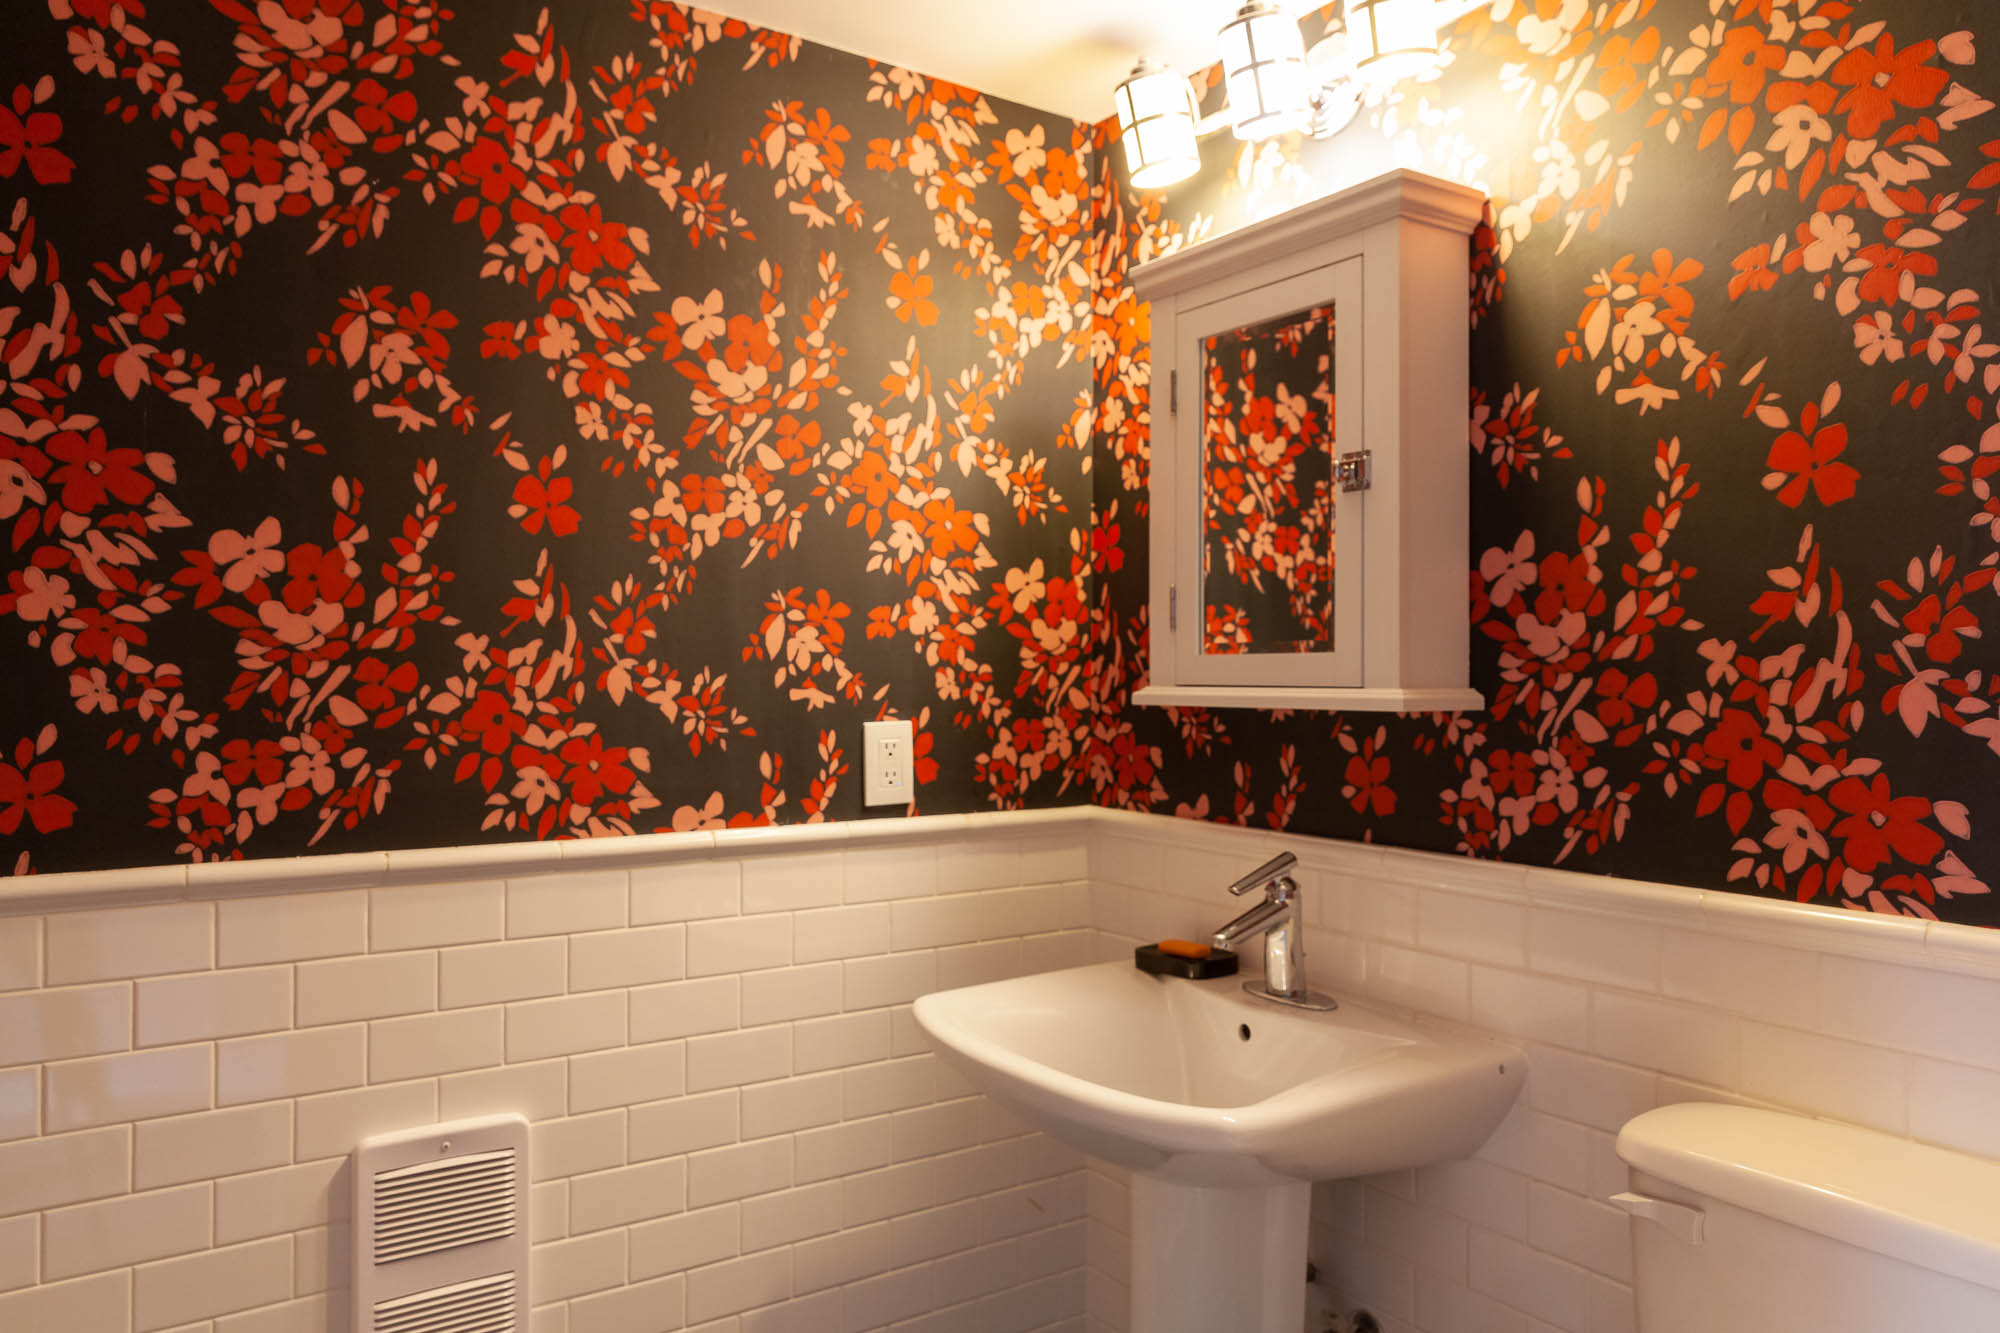 Bathroom with floral wallpaper in Collingwood, Ontario